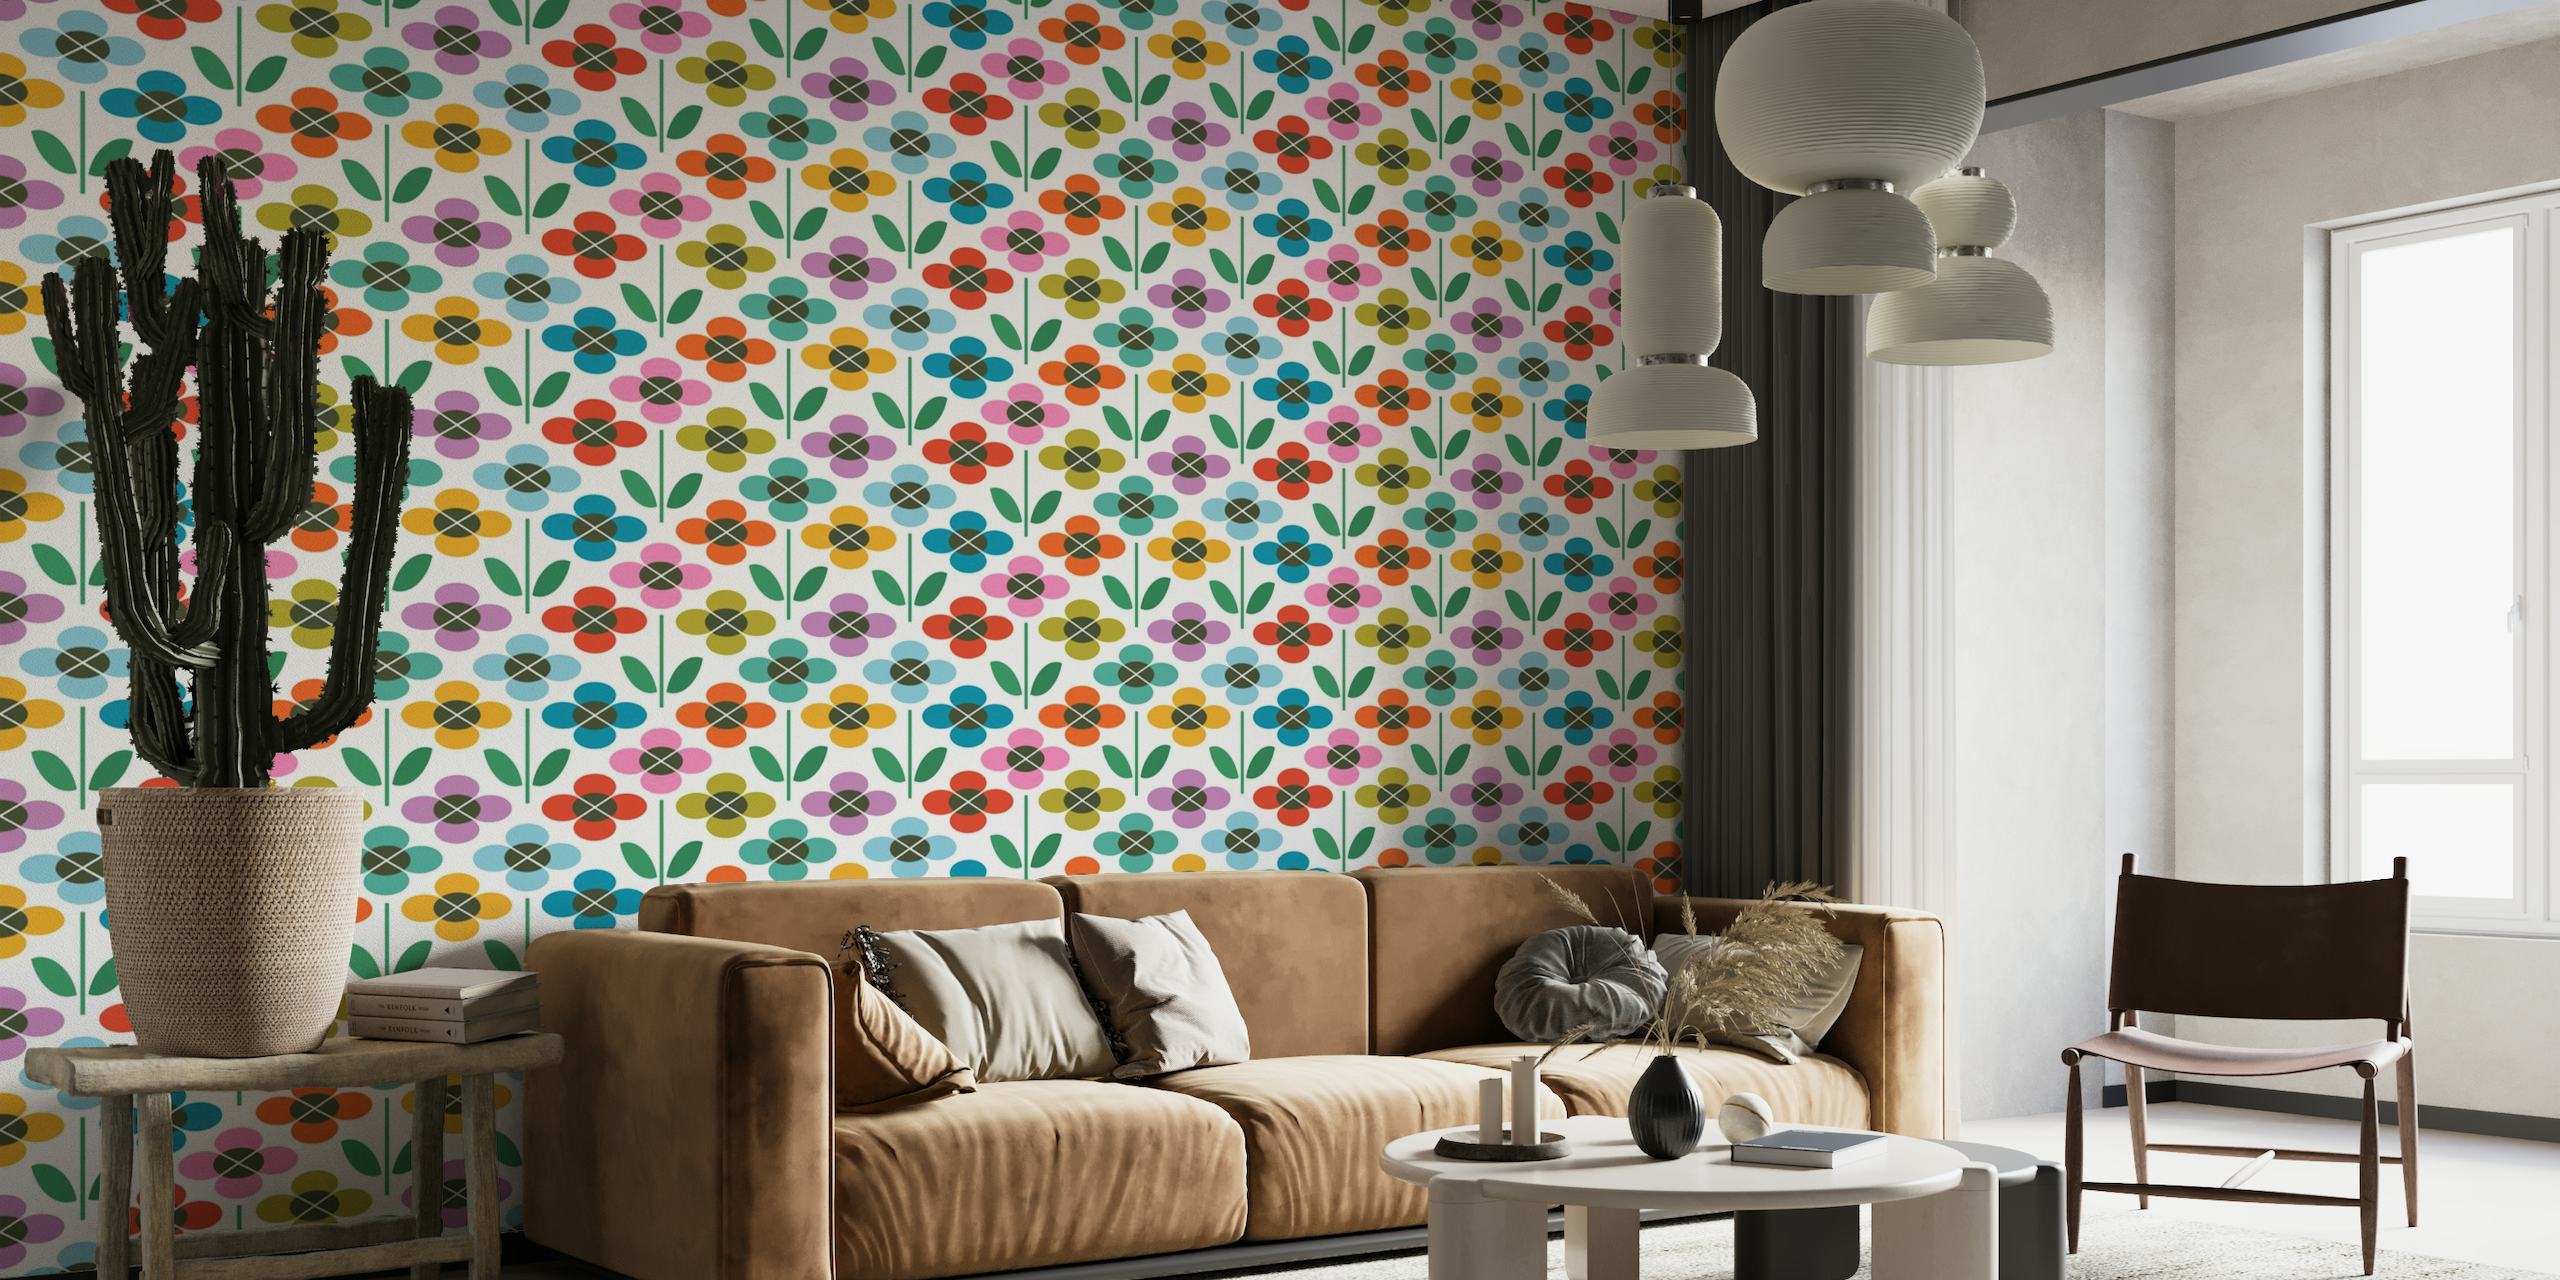 Colorful stylized floral pattern wall mural with plaid design elements